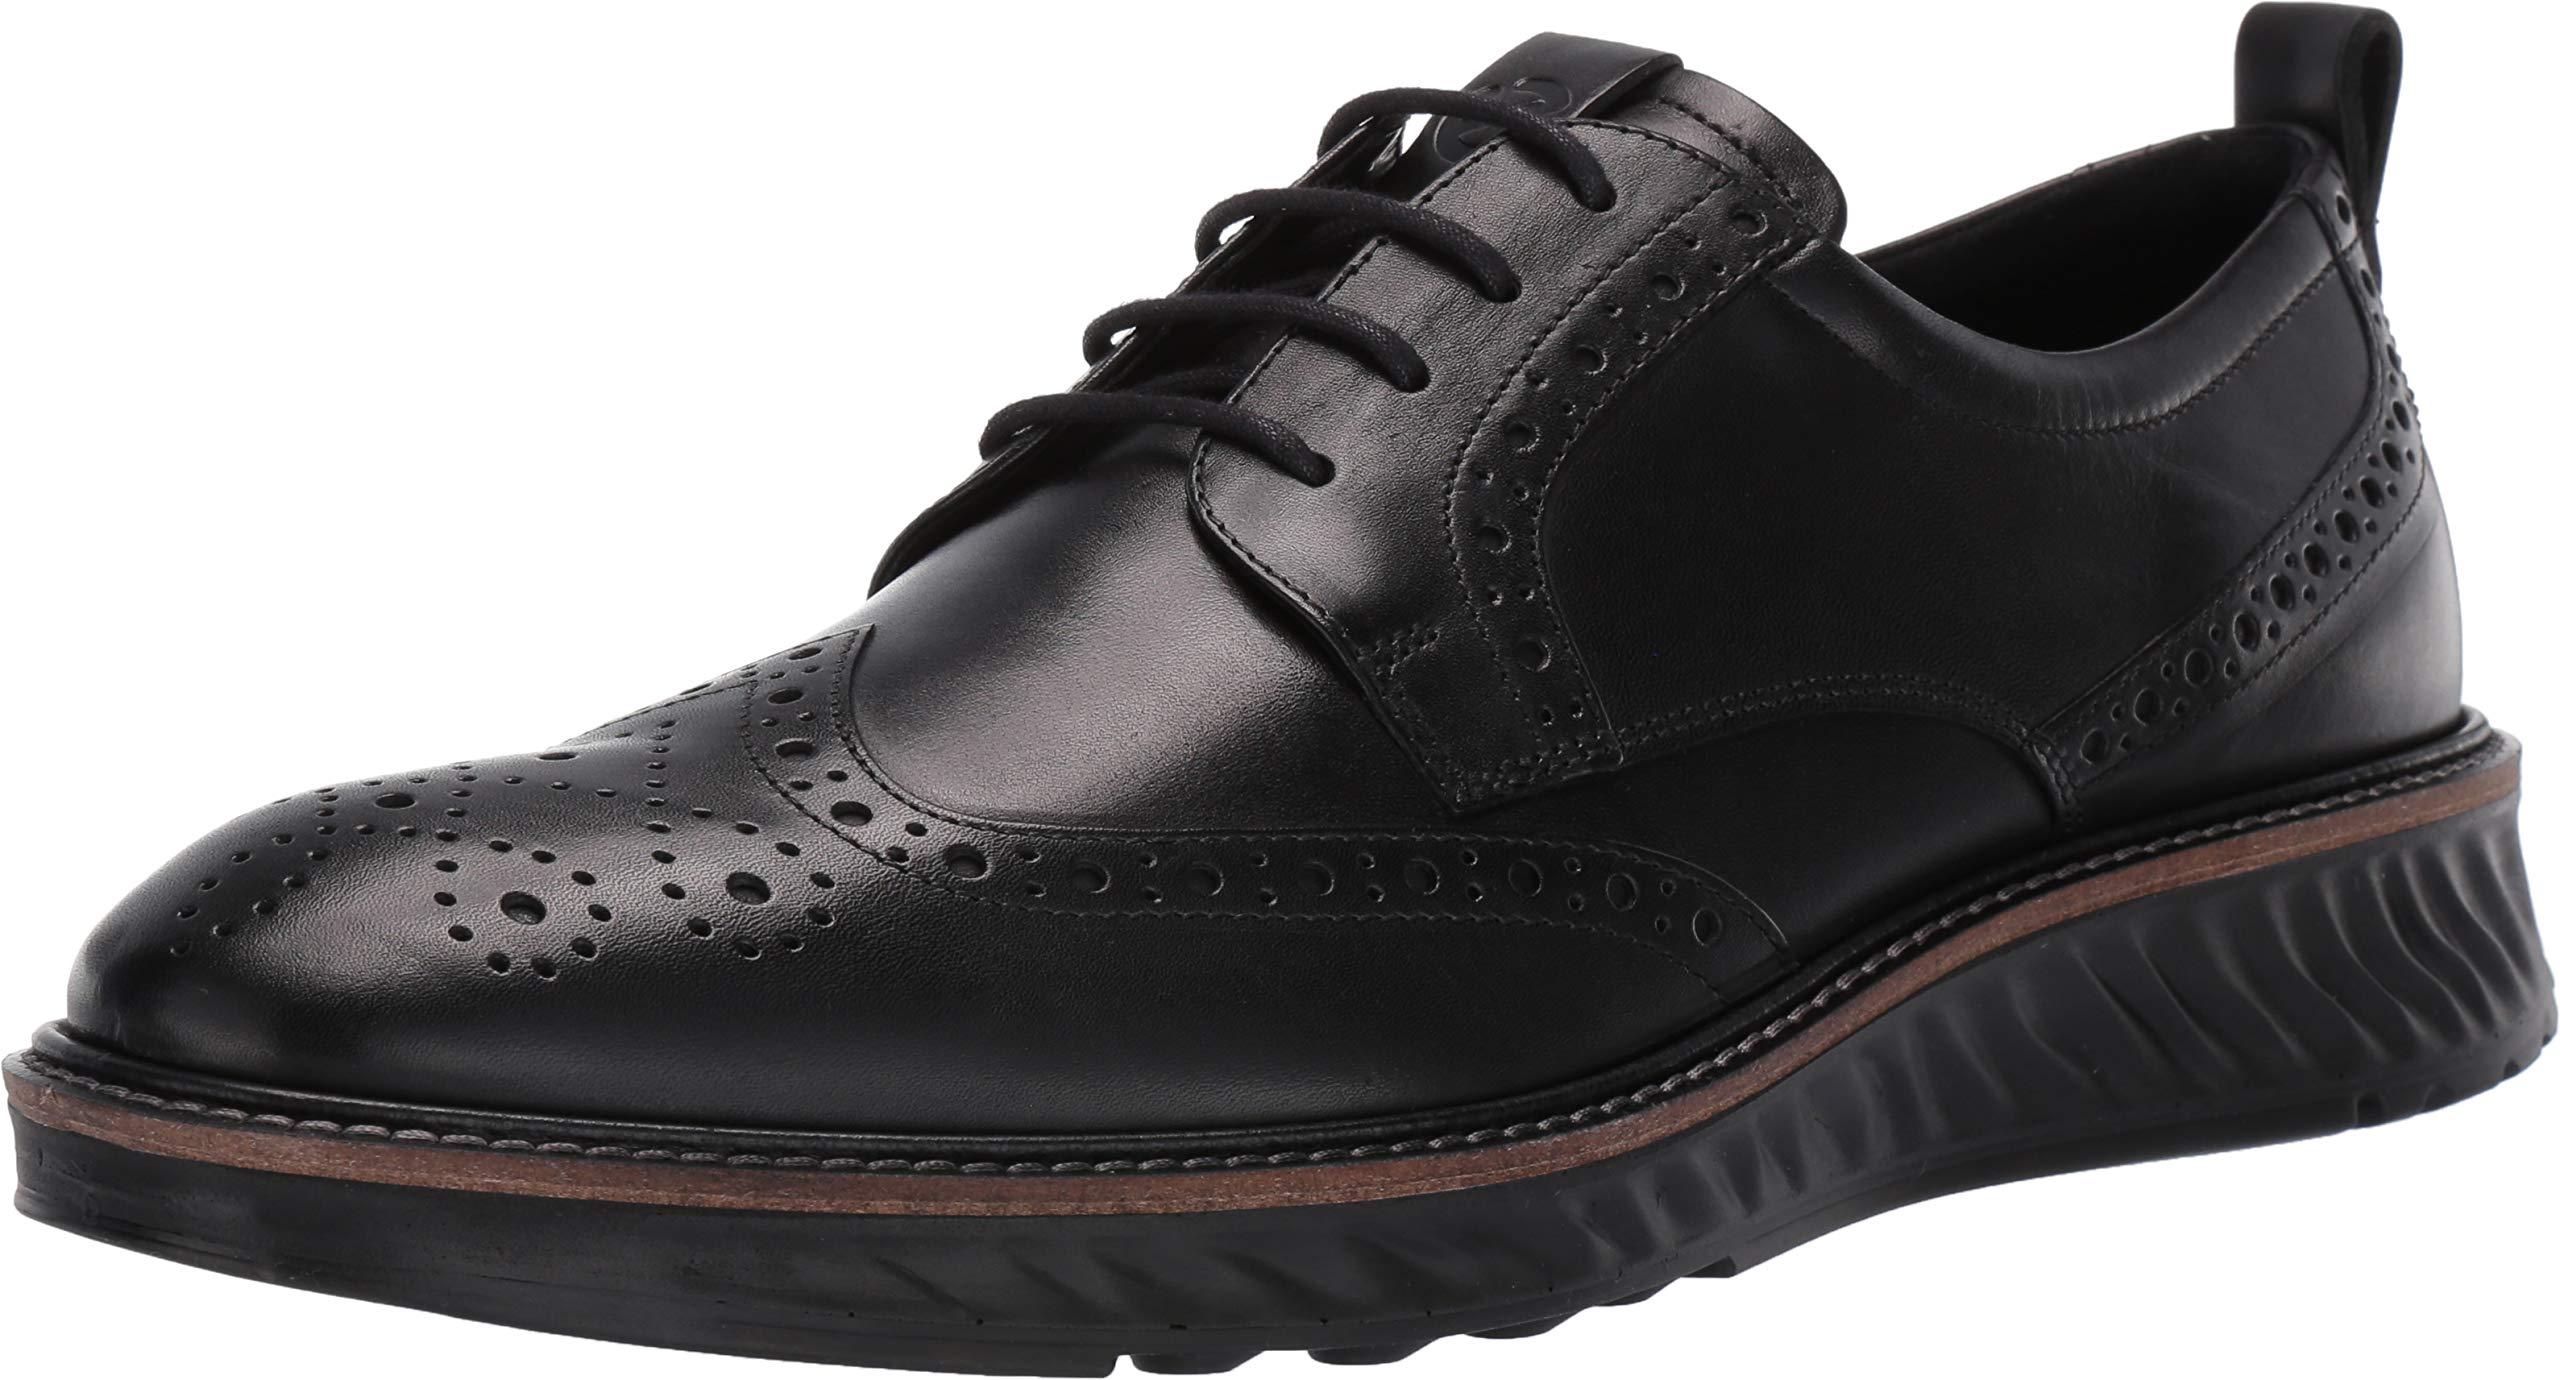 Ecco St1 Hybrid Brogue Oxford in Black for Men - Save 11% - Lyst